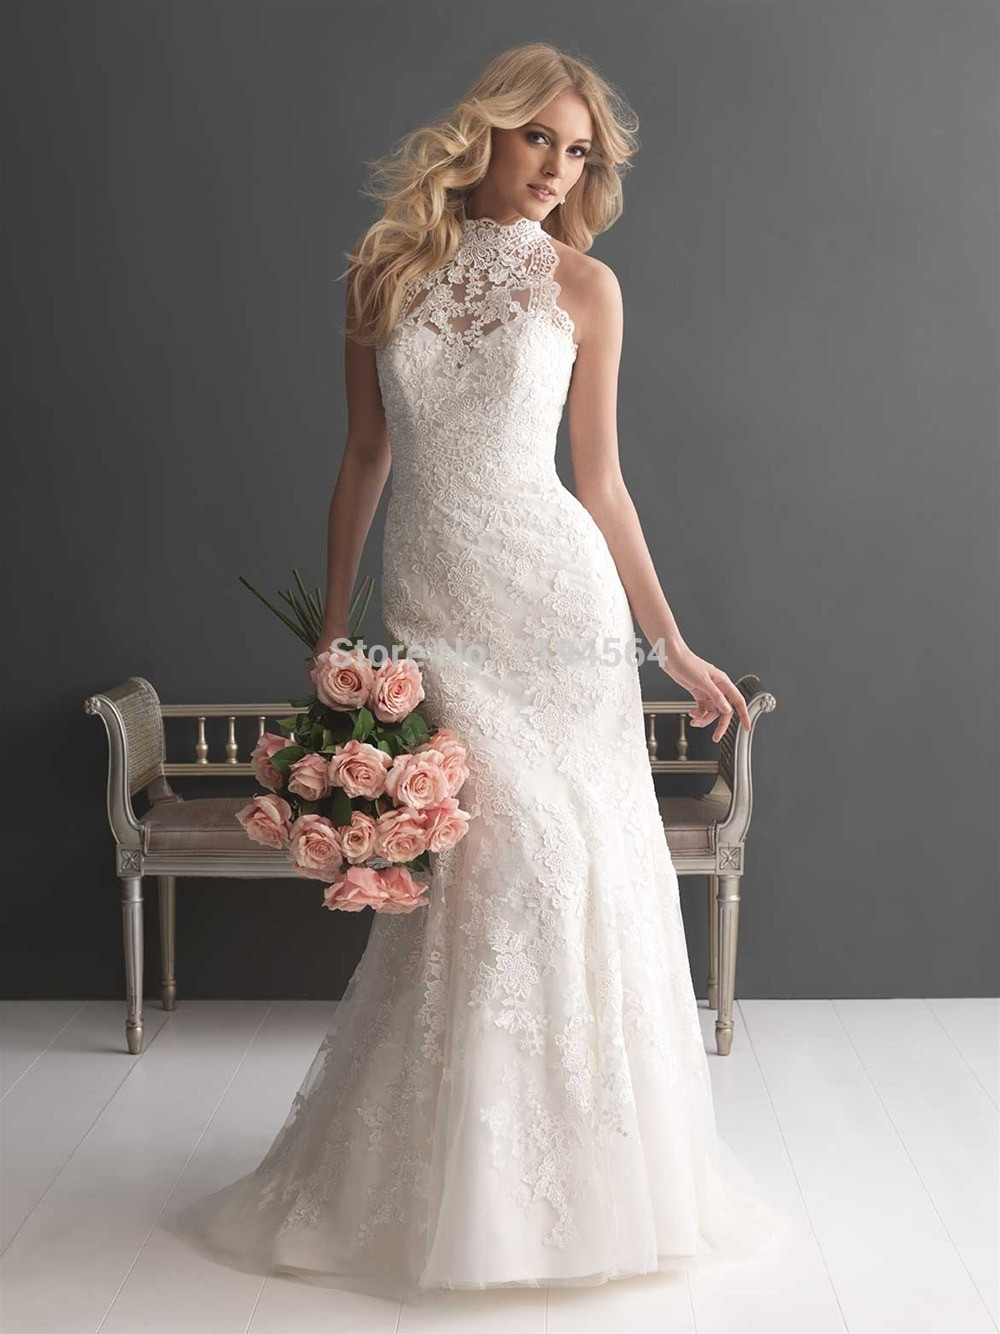 Halter Wedding Gowns
 China Wedding Dresses Halter Lace Top Bridal Gown 2015